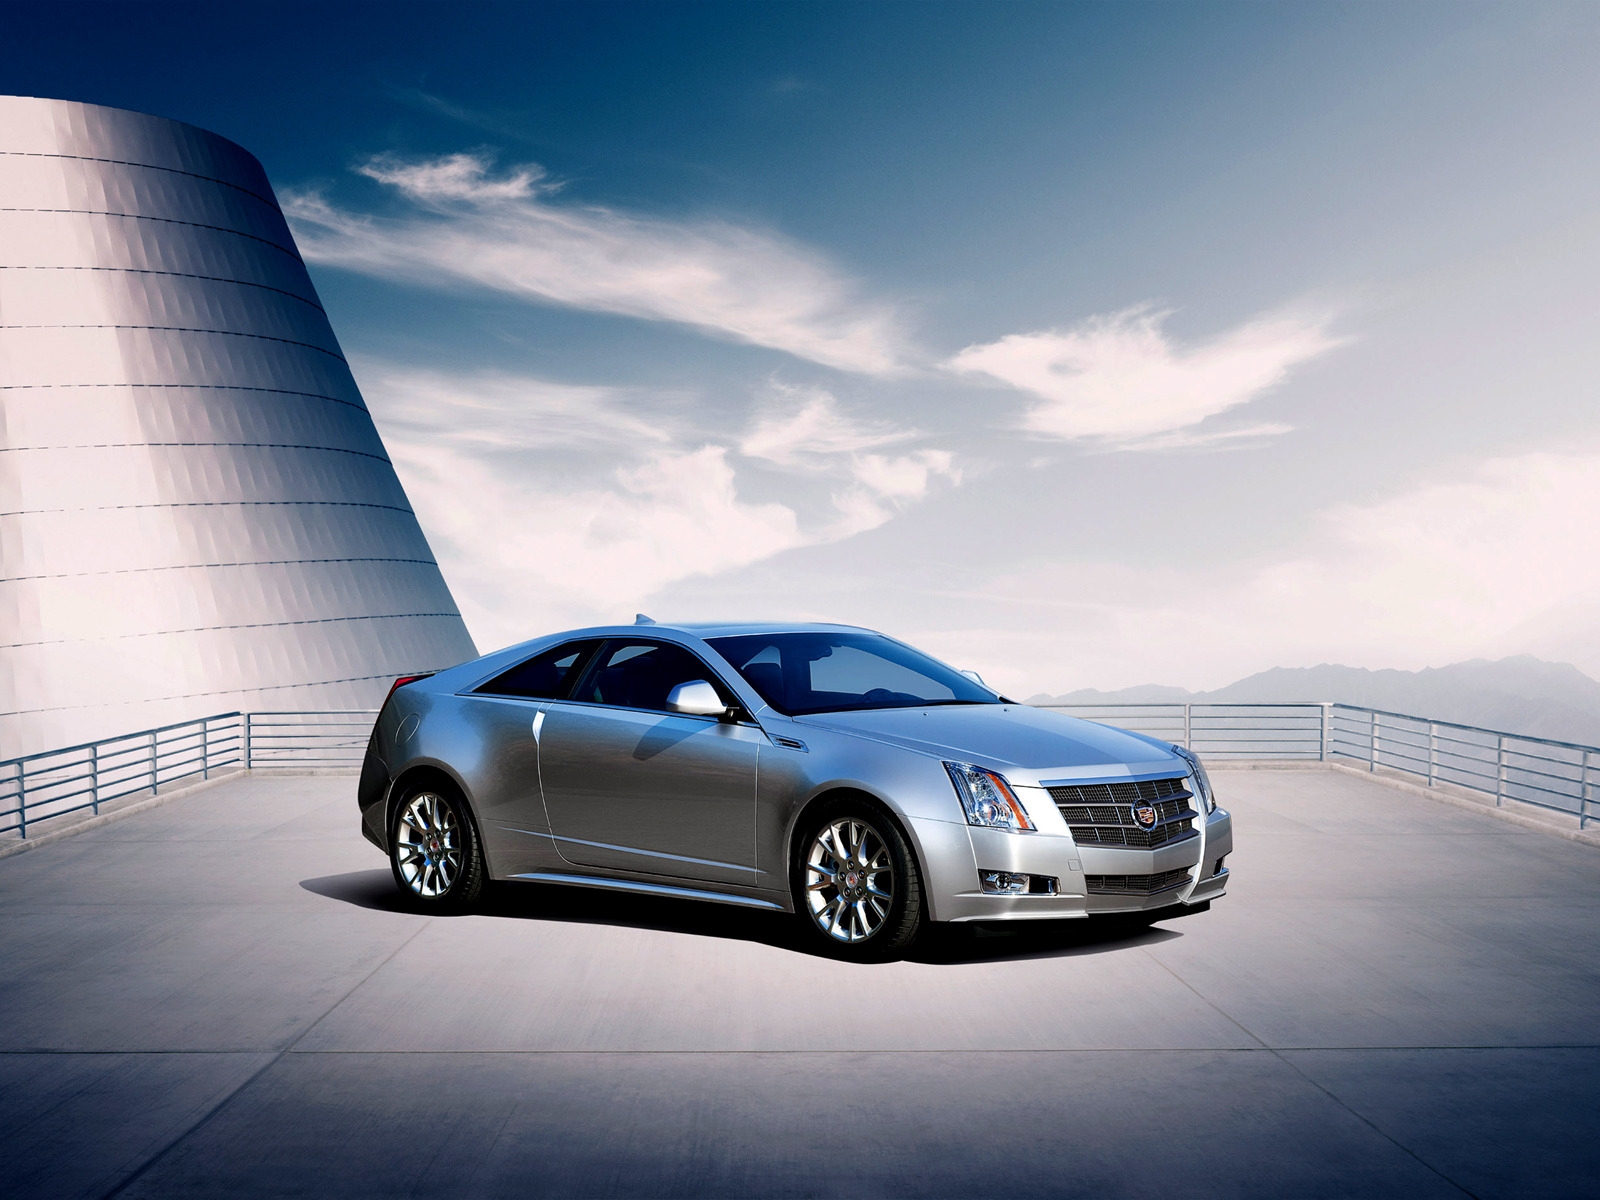 2011 Cadillac CTS Coupe for 1600 x 1200 resolution